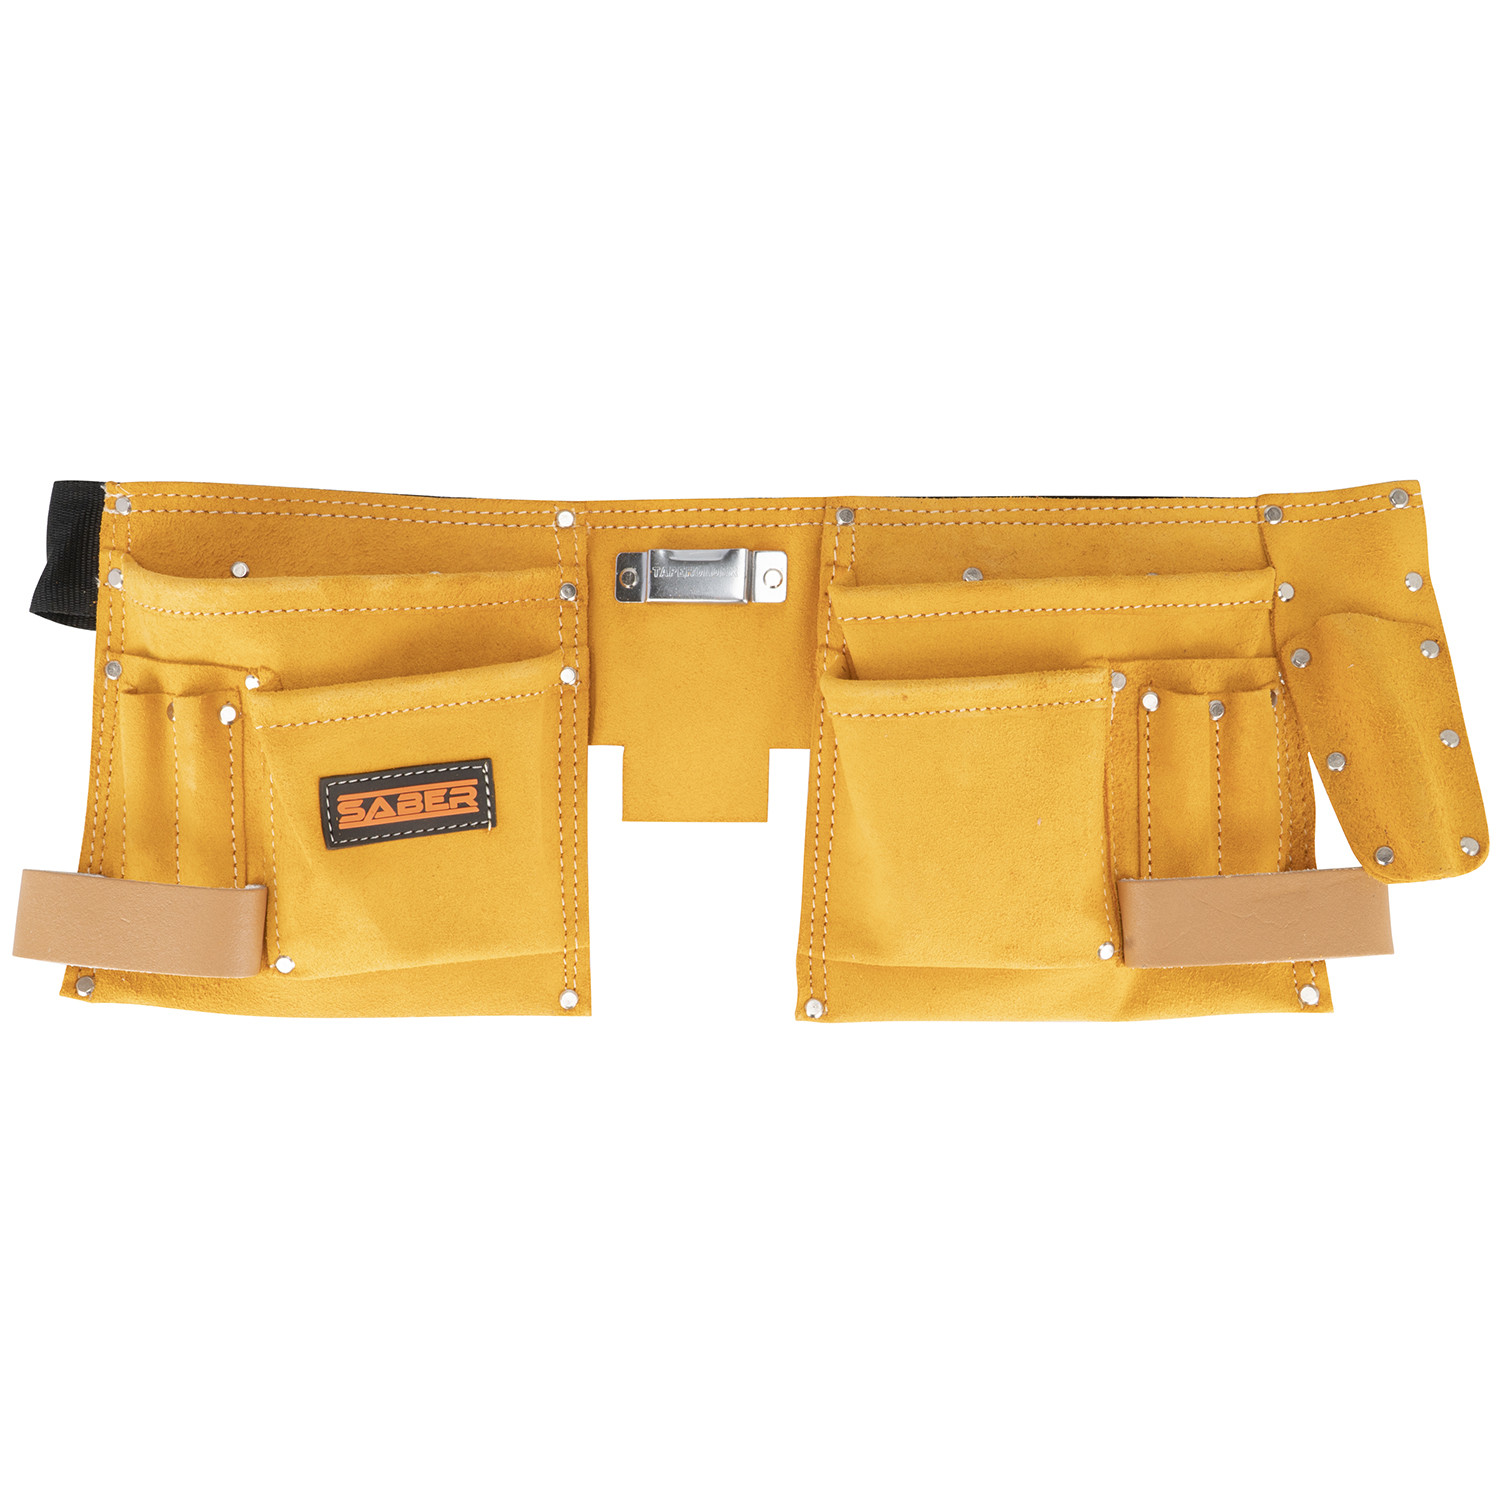 Saber Yellow Double Leather Tool Pouch Image